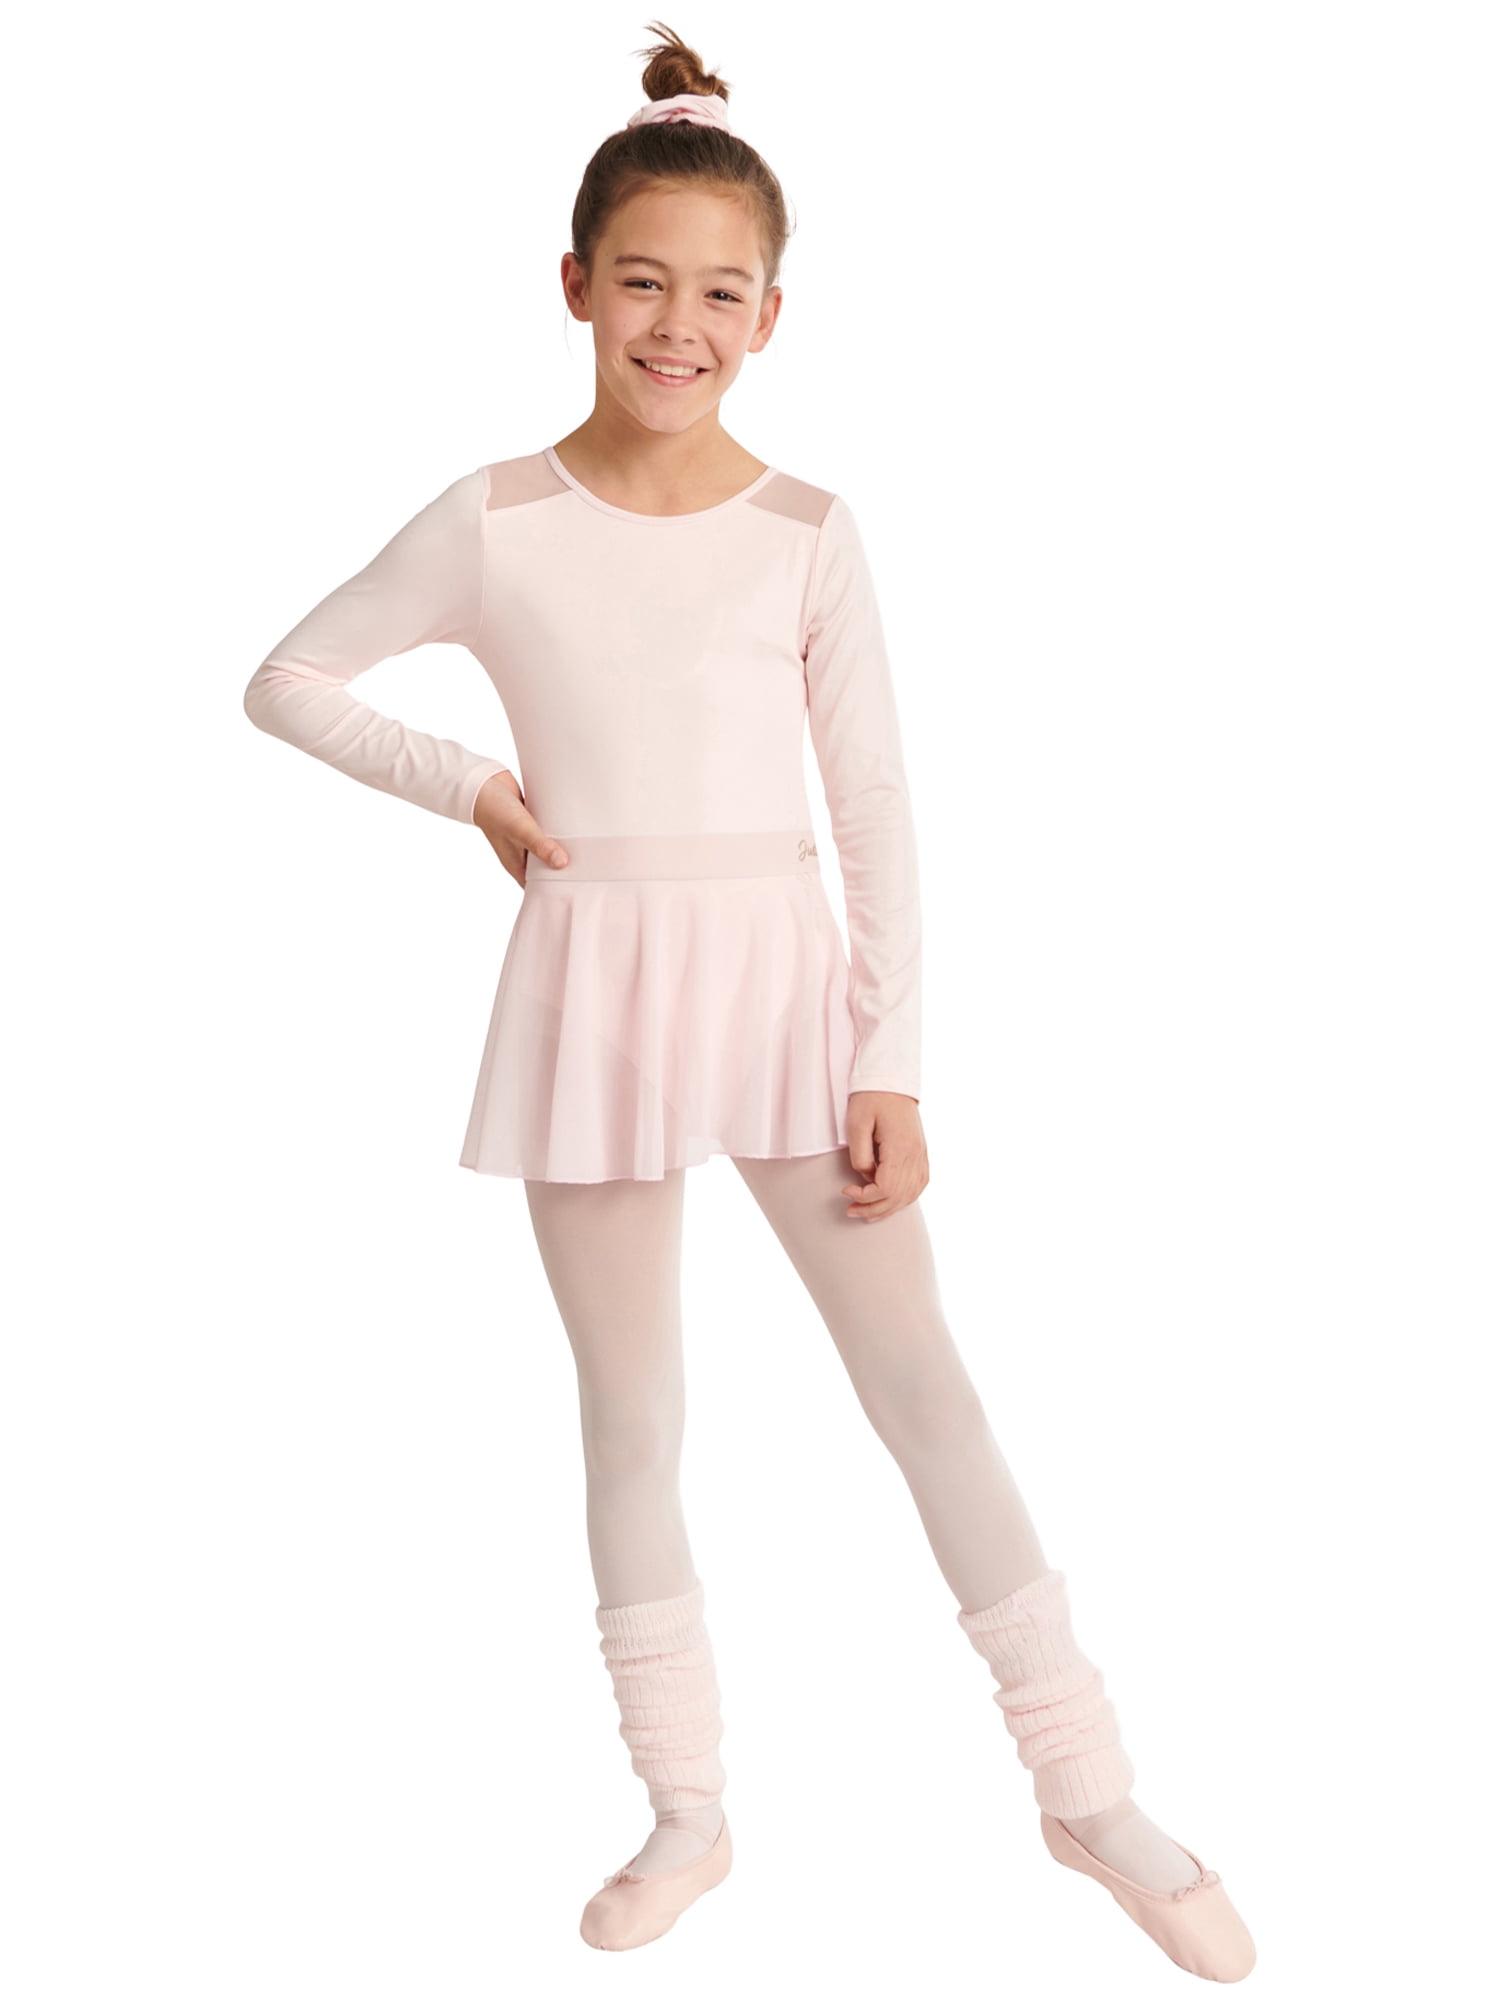 Move Dance Leotard for Girls Long/Ruffle Sleeves Toddler Ballet Outfits with Hollow Back for 3-8 Years 